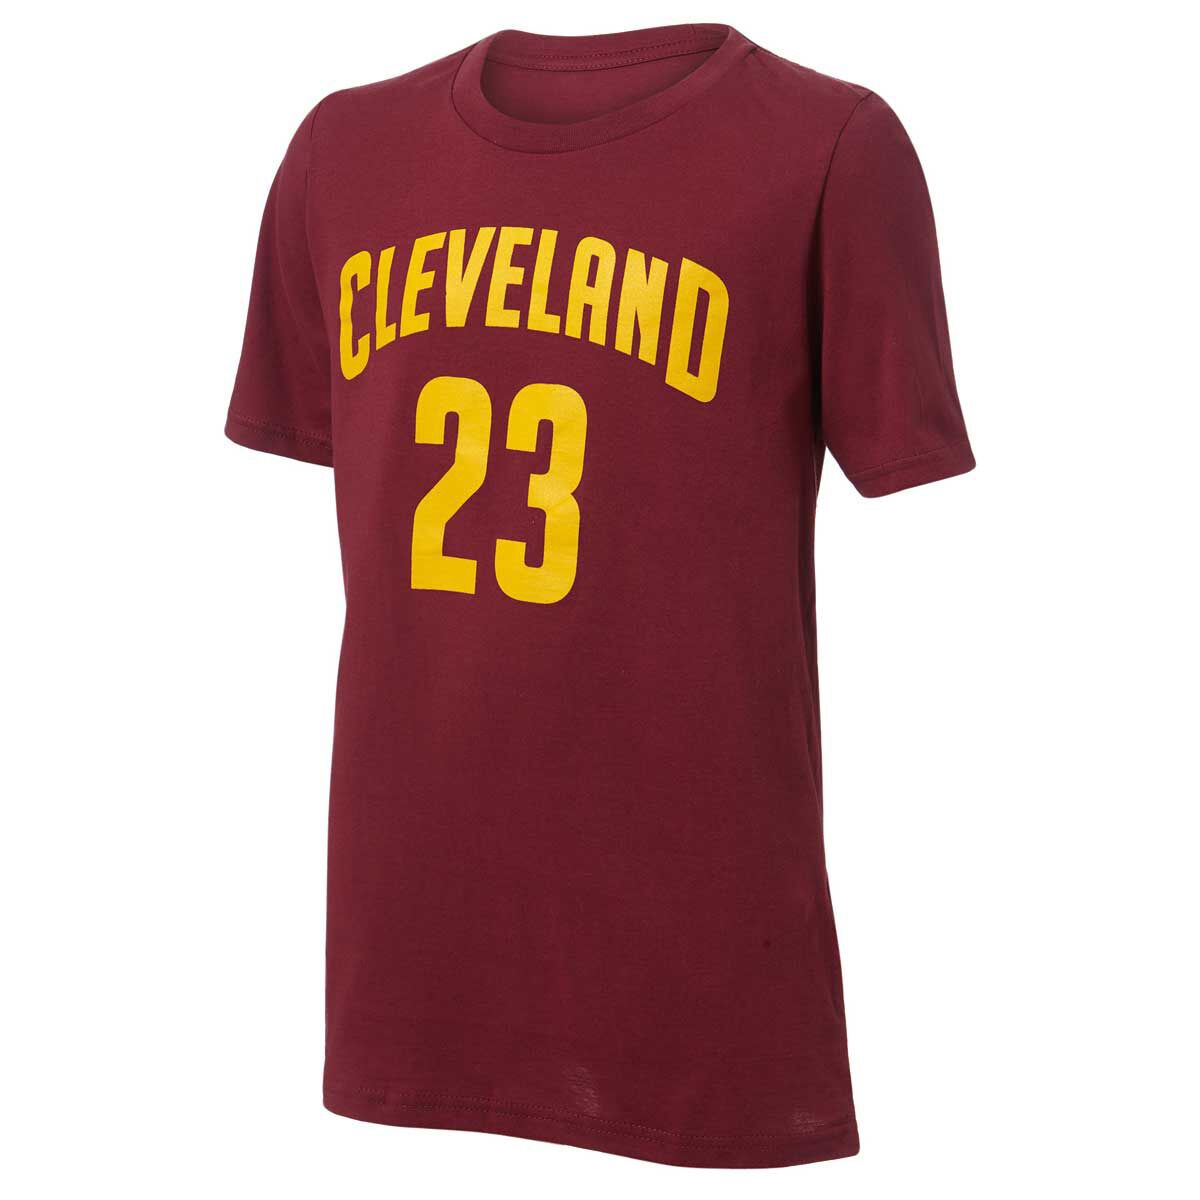 Outerstuff Kids Cleveland Cavaliers 